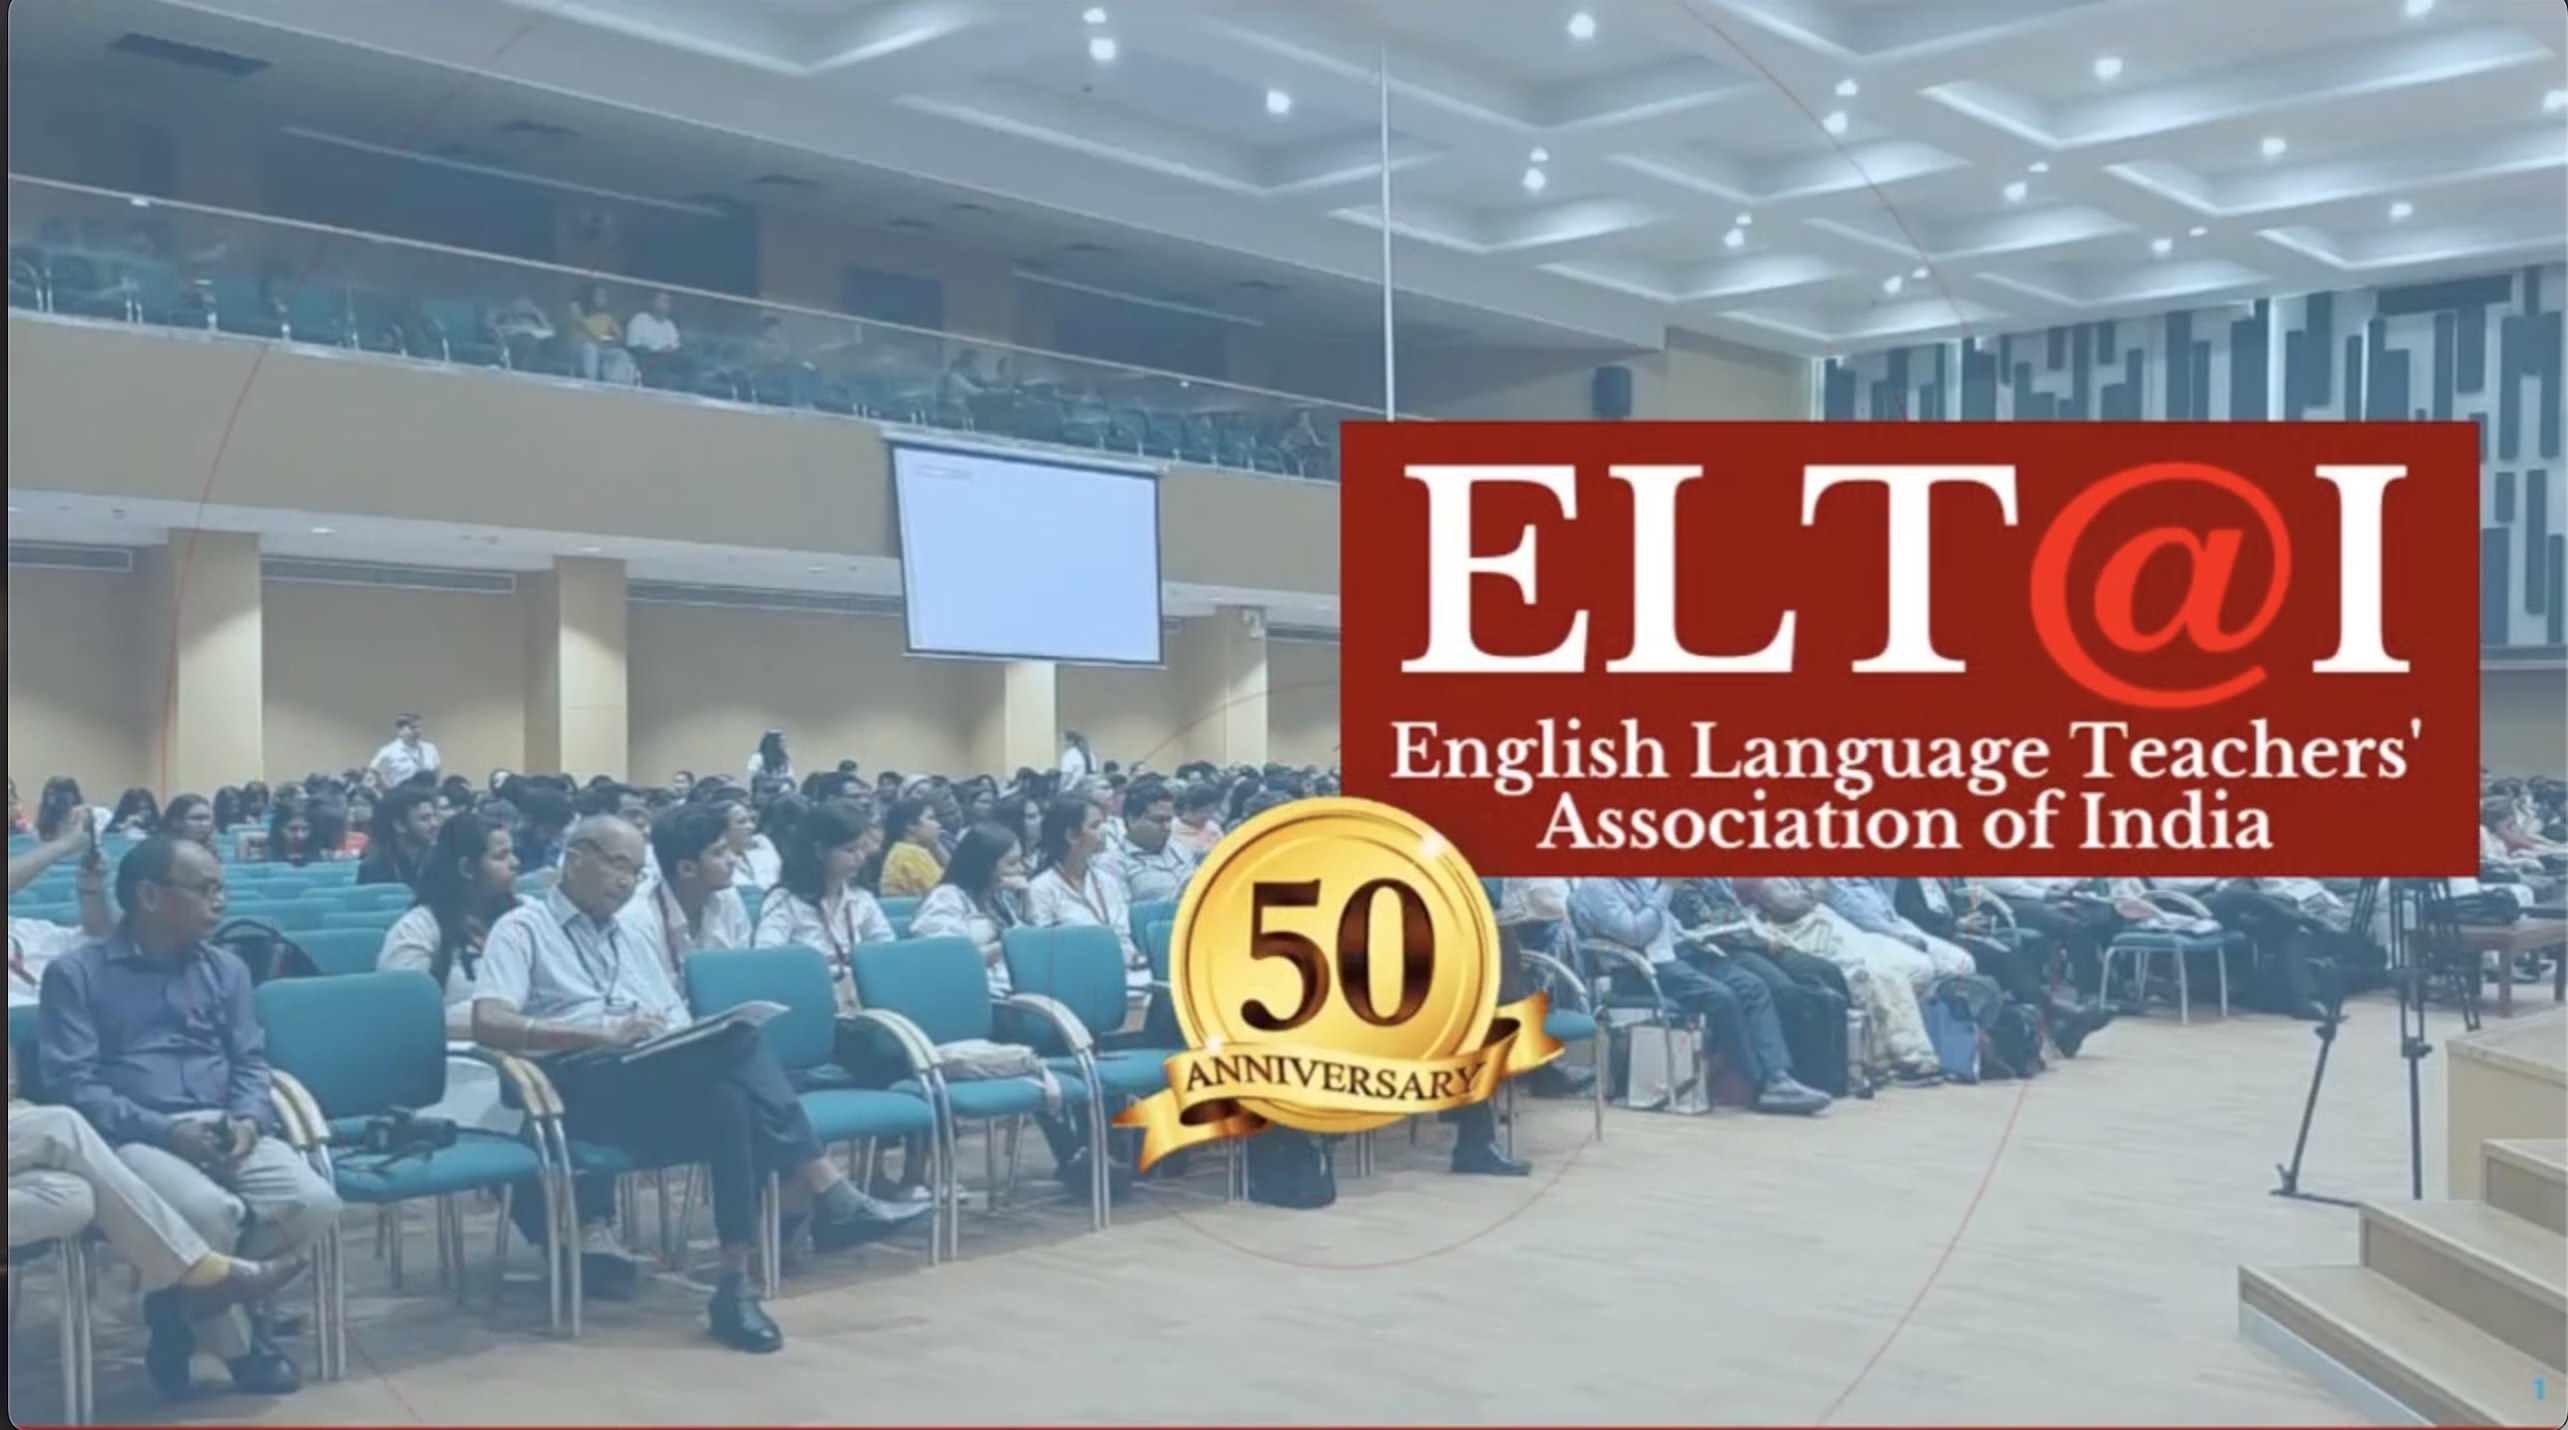 Video: Introduction to ELTAI